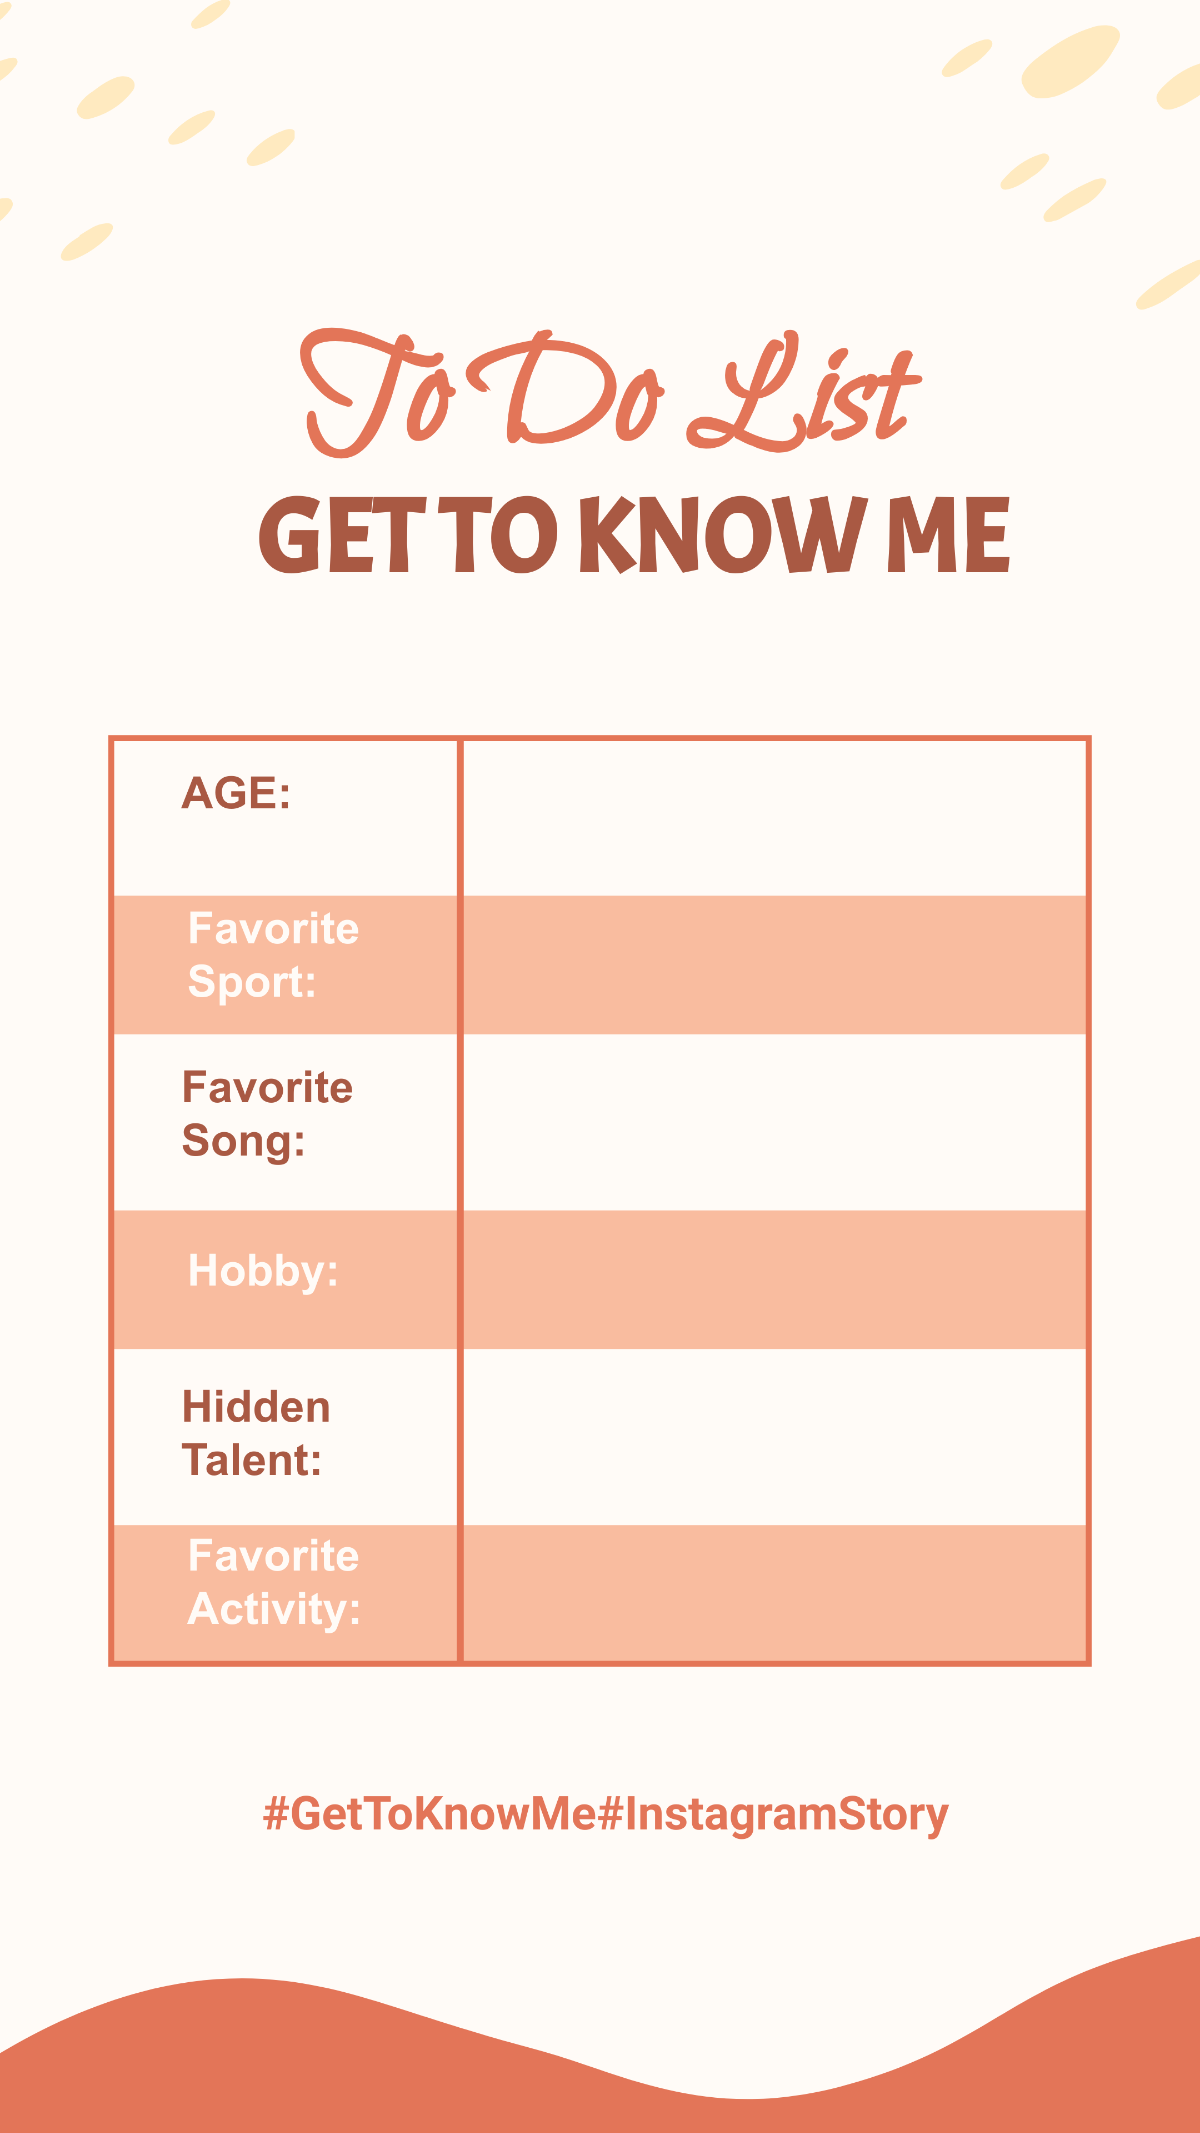 Free To Do List Get to Know Me Instagram Story Template